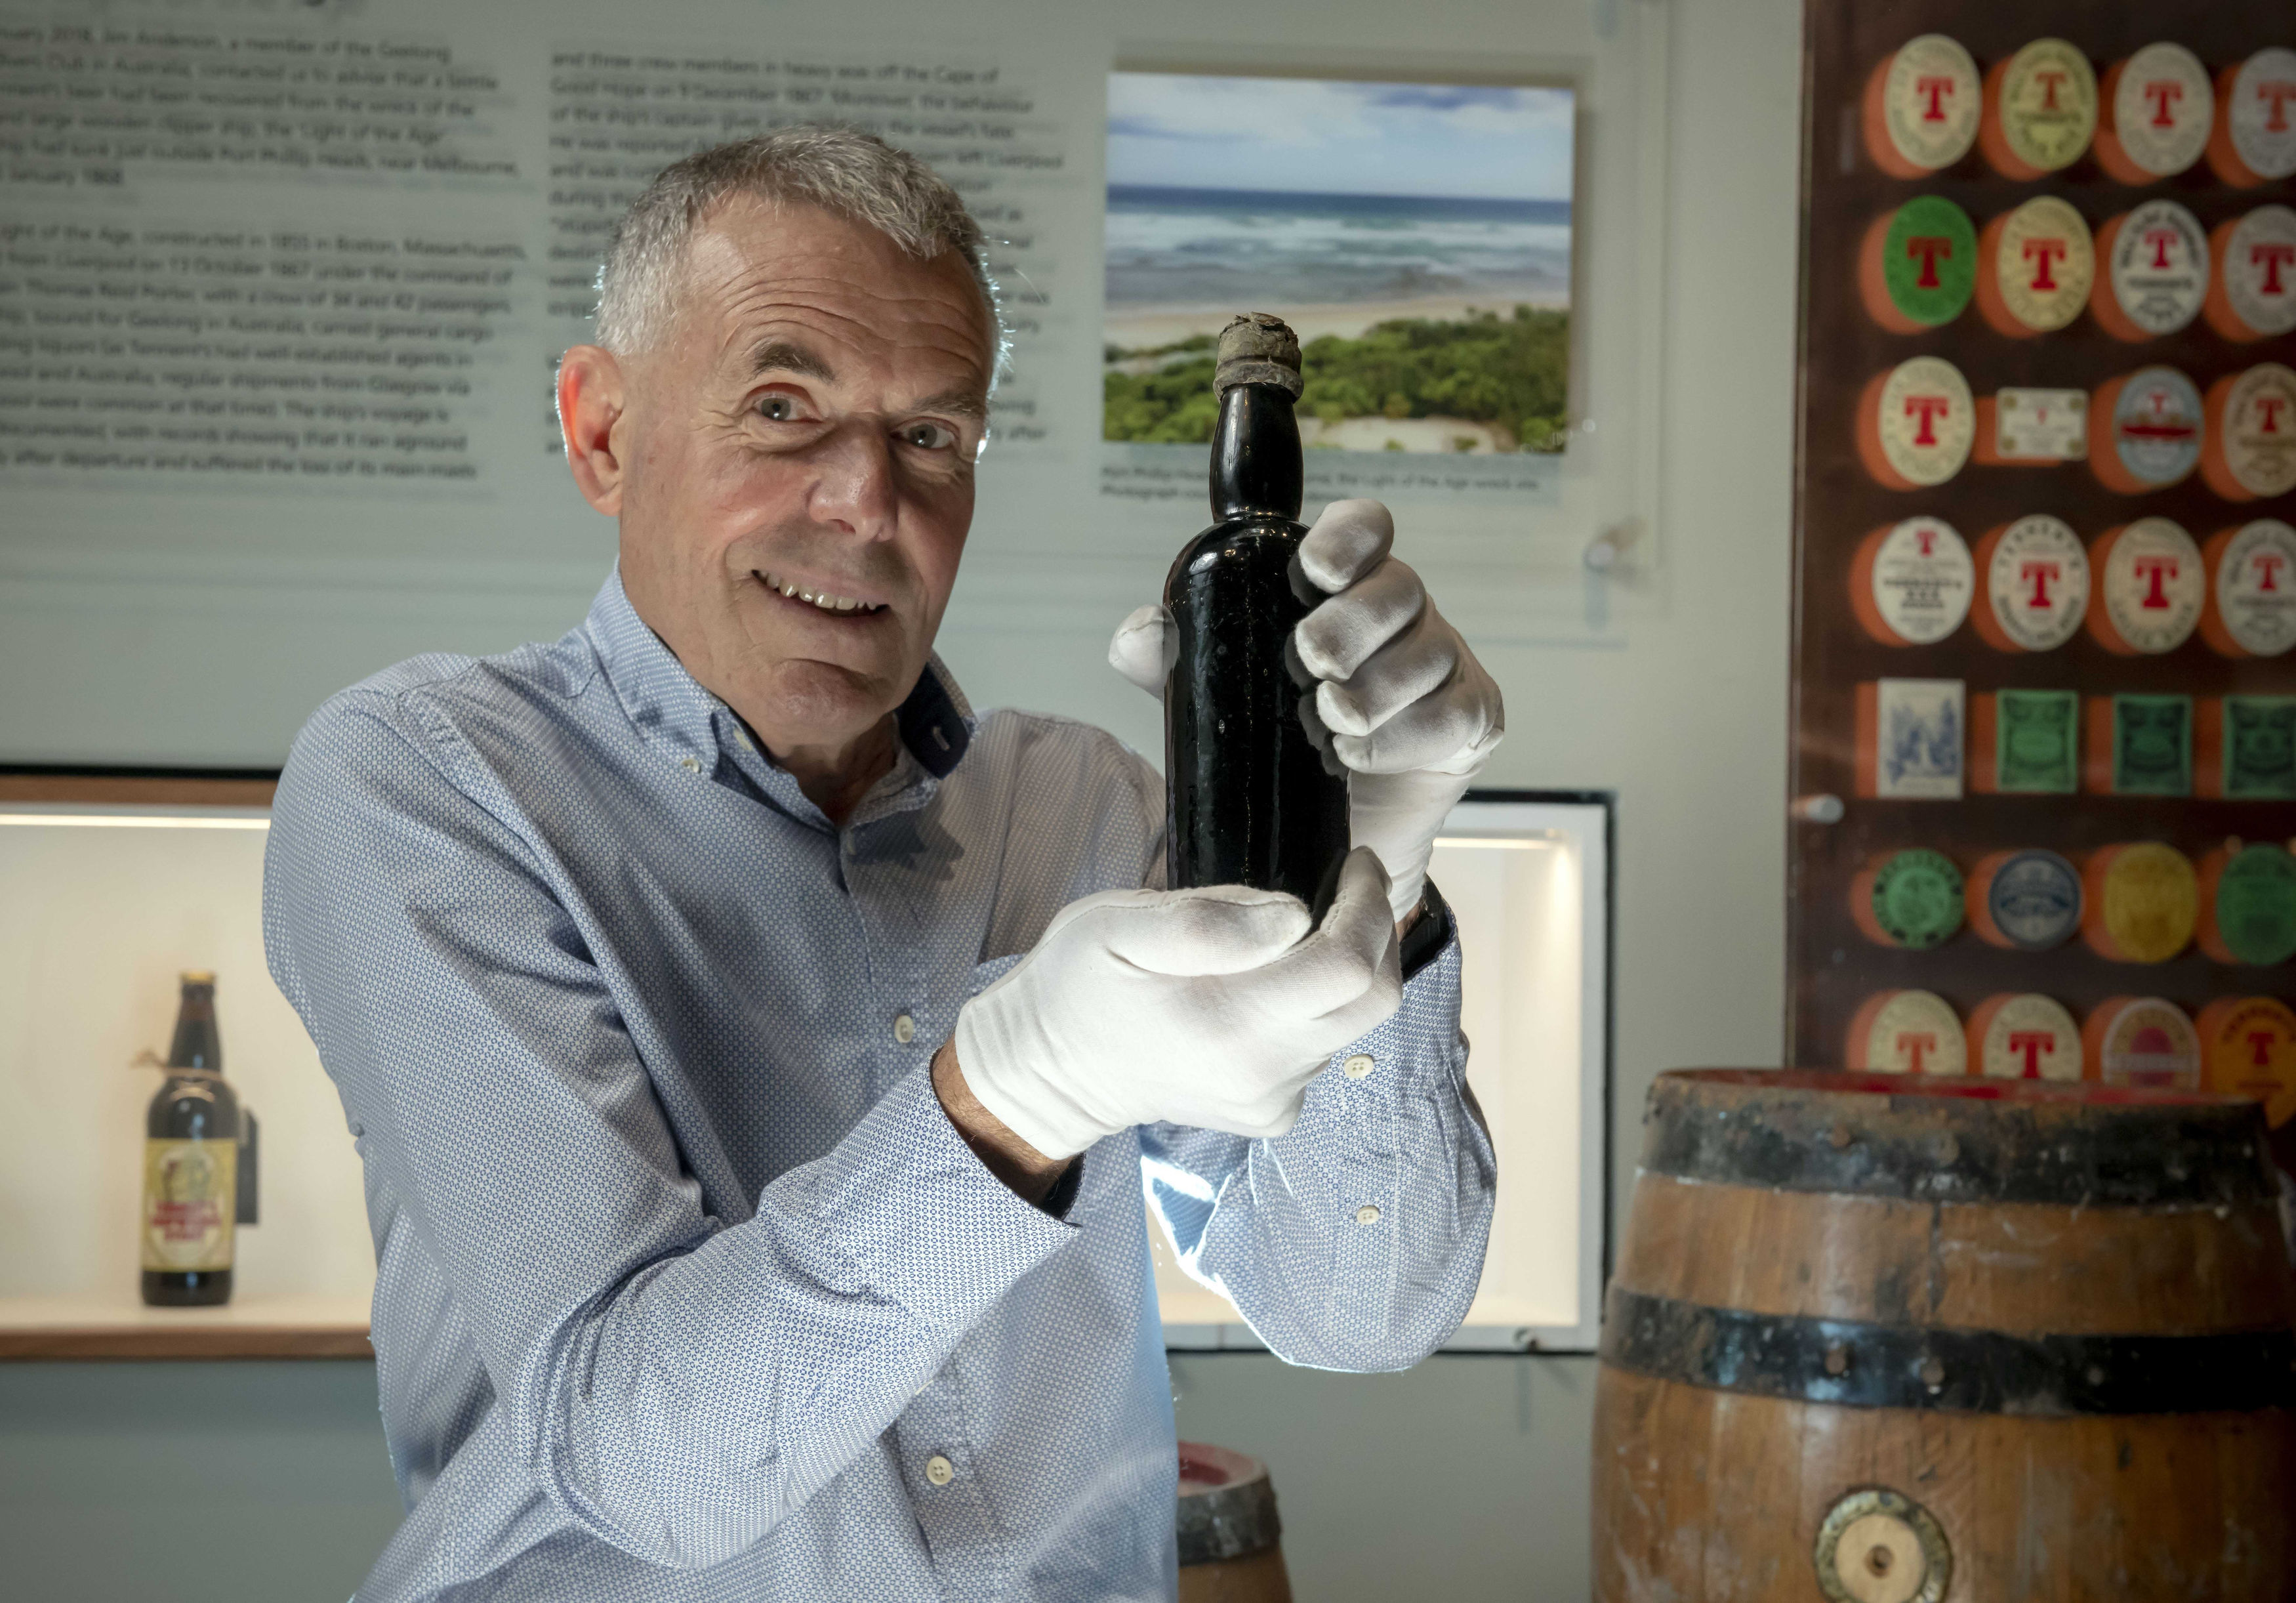 Diver Jim Anderson discovered the bottle in a shipwreck off Australia (Paul Chappells / Tennents / PA Wire)